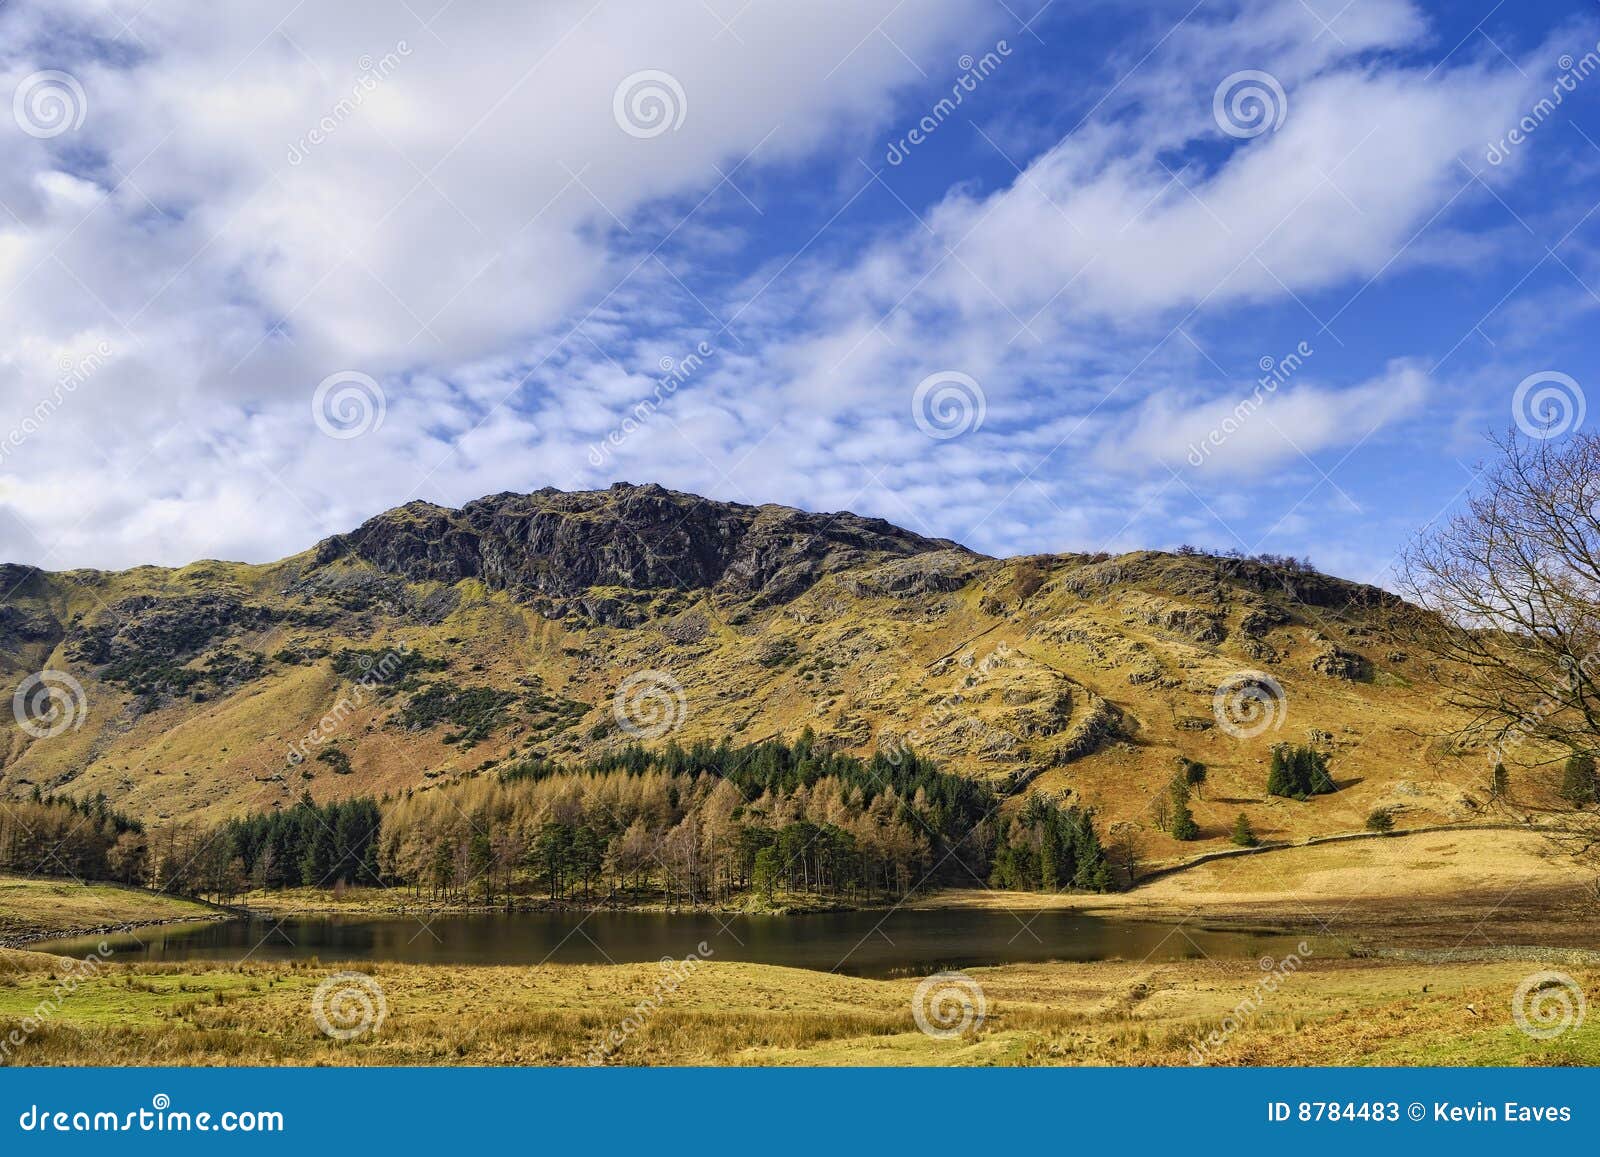 view of mountainous landscape of Lake District with Blea Tarn lake ...